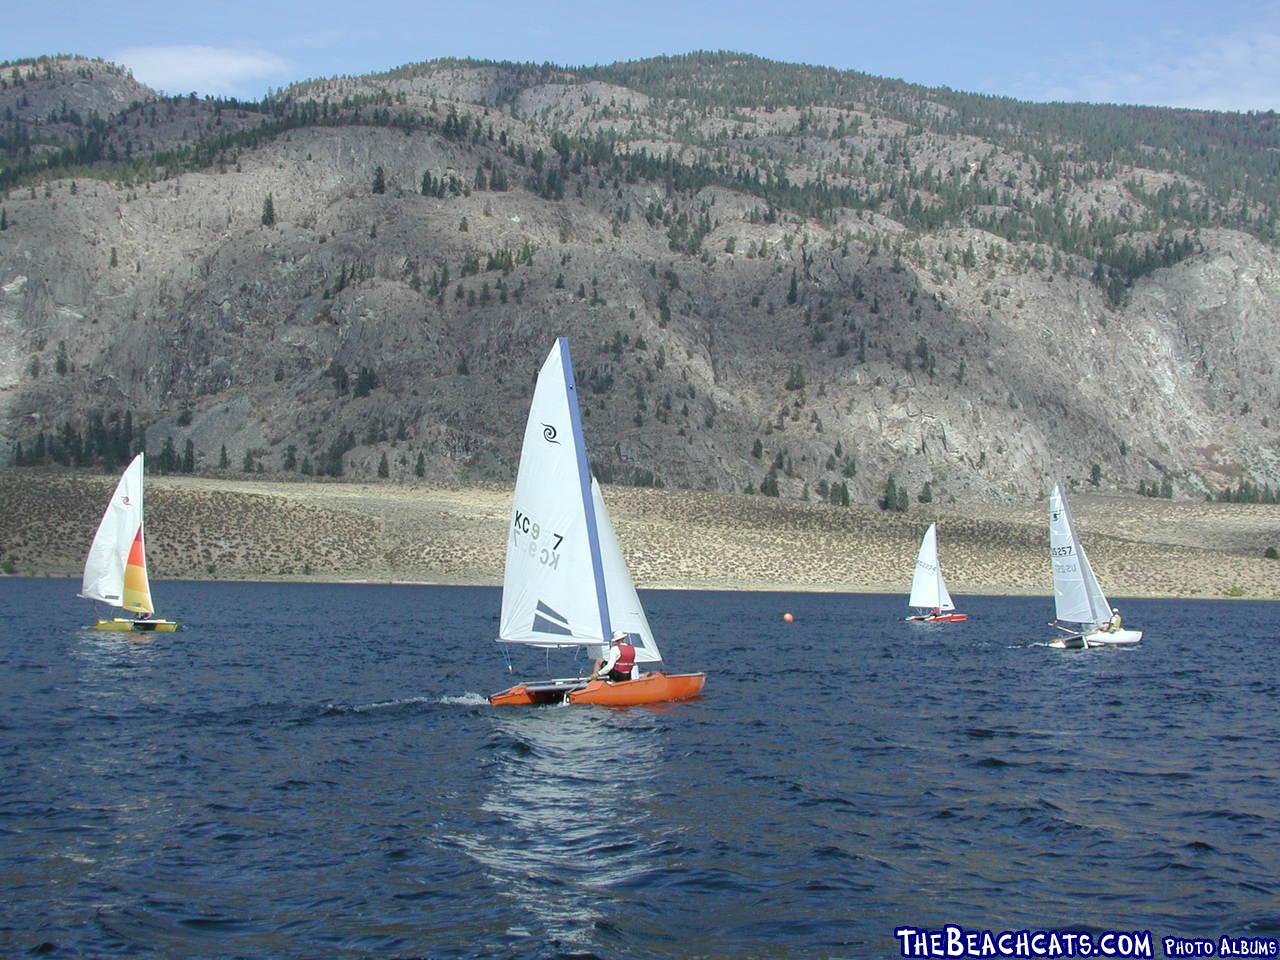 JOHN ZUPAN of Osoyoos, trying to find his way to the frist mark.